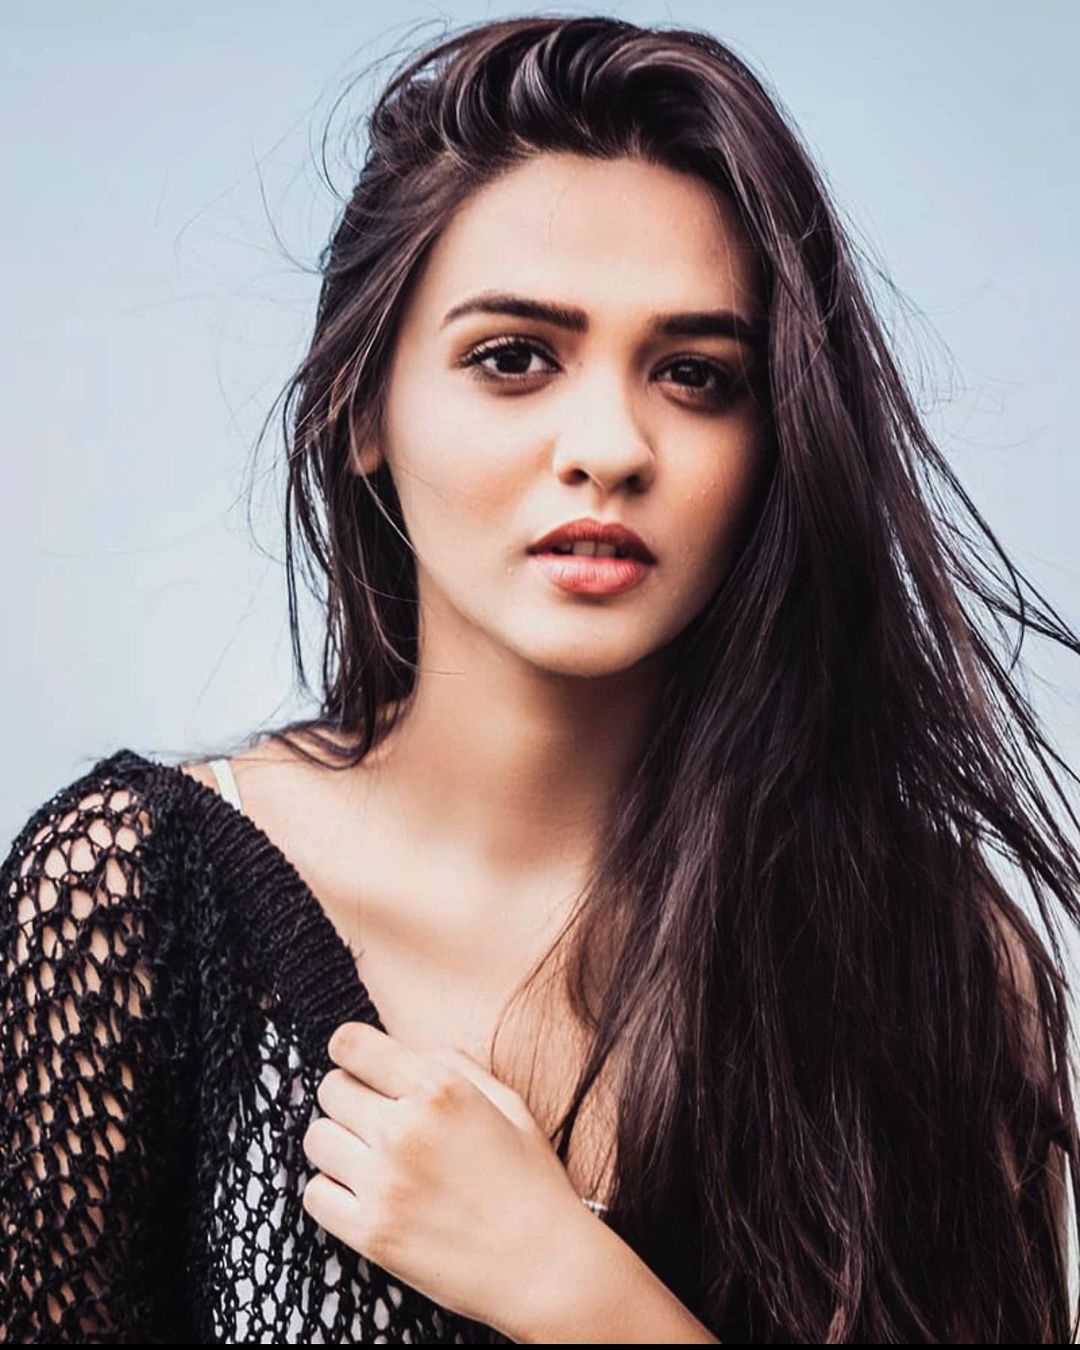 Pranali Rathod Age, Wiki, Biography, Family, Social Life and Net Worth